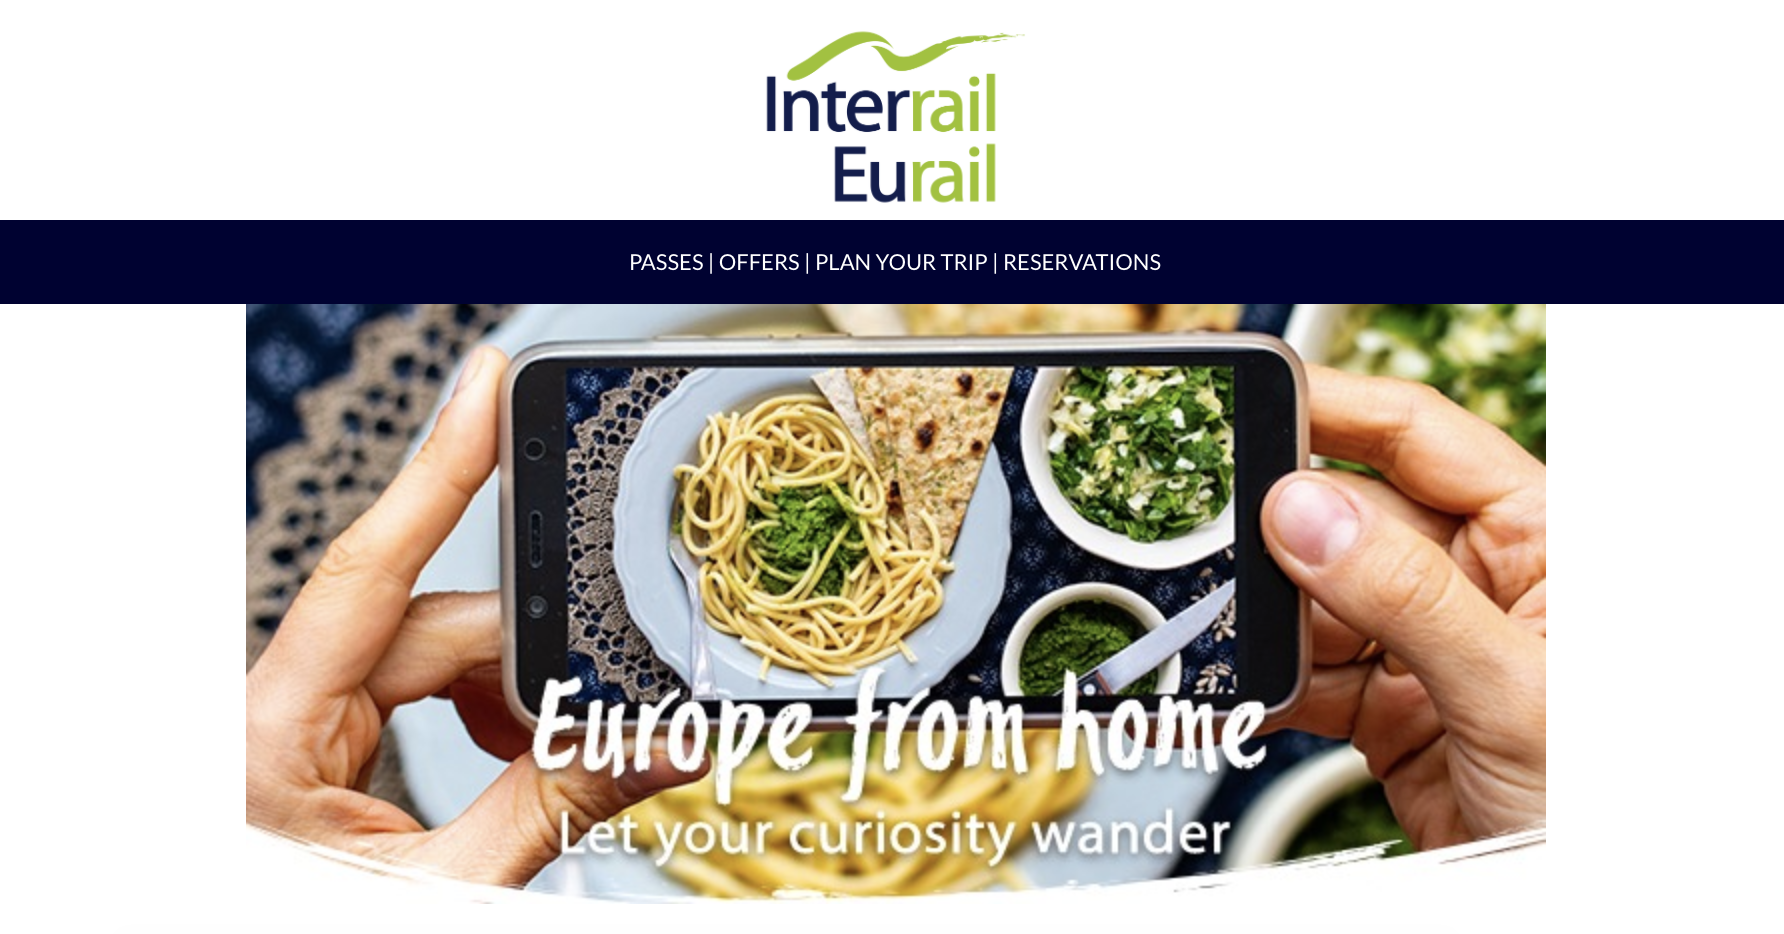 An email from Interrail